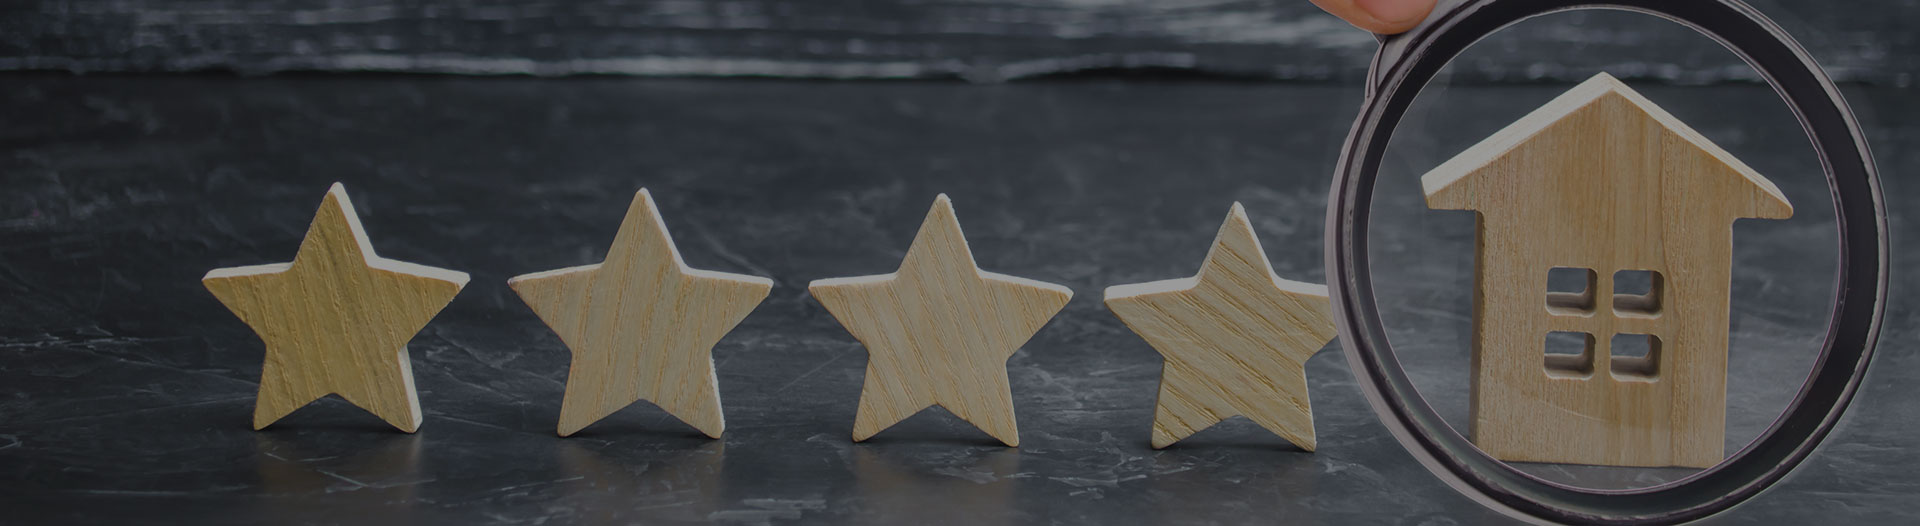 four wooden stars and one wooden house